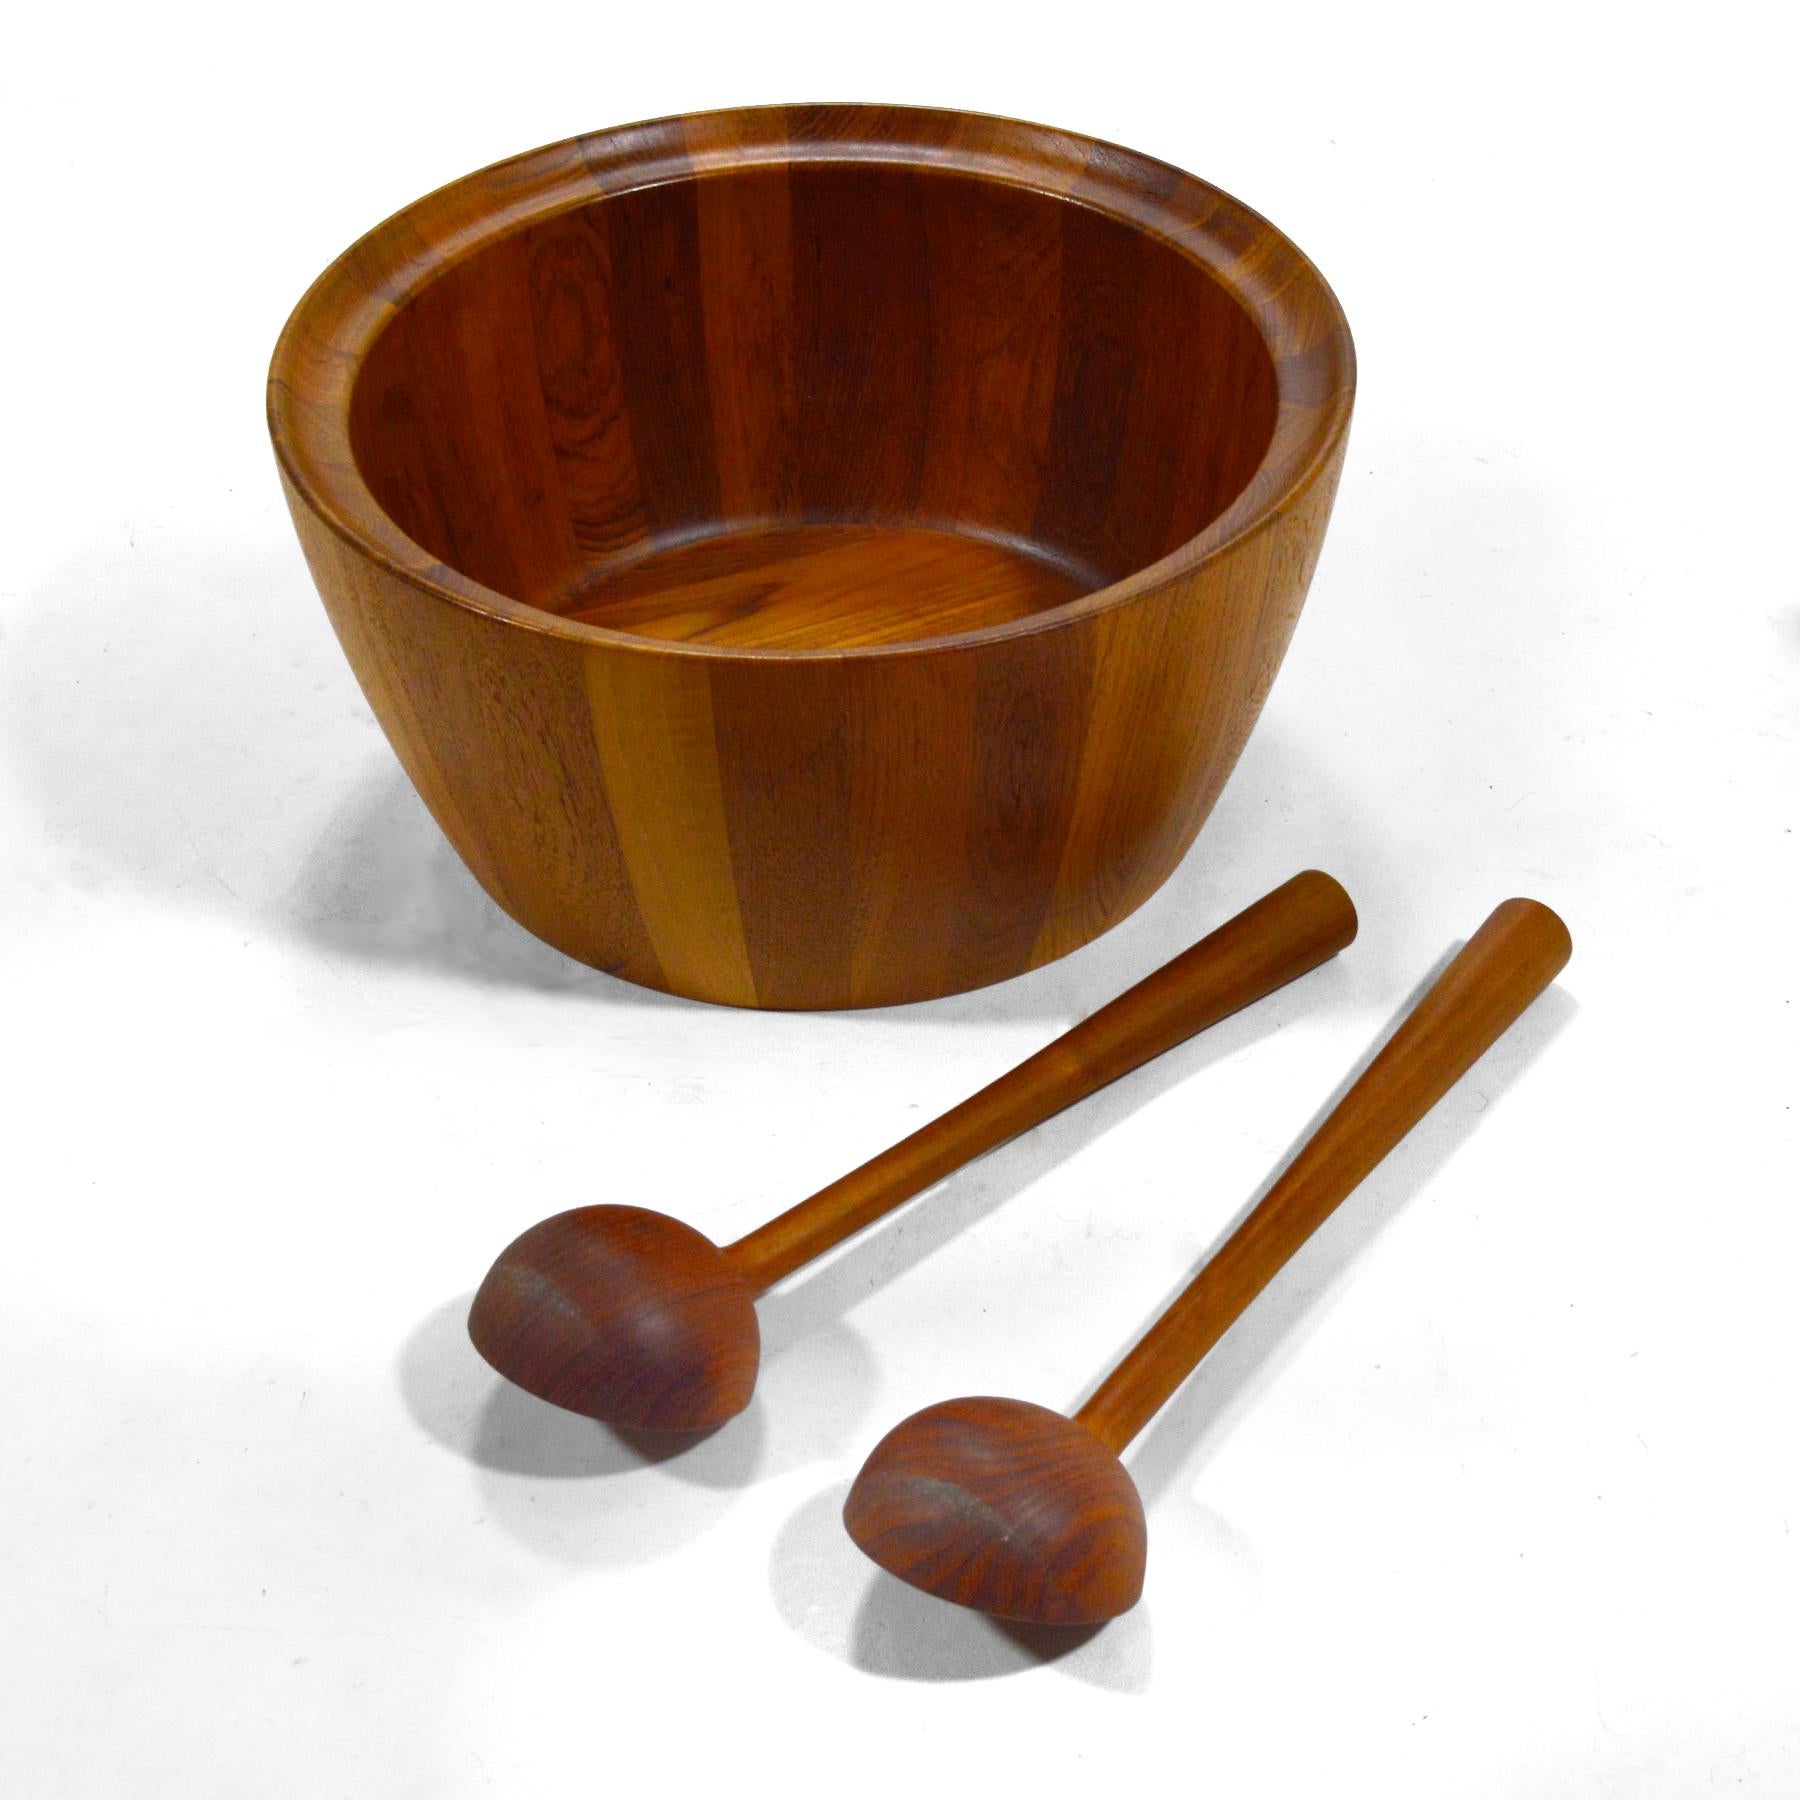 Oversize Staved Teak Bowl and Servers by Richard Nissen In Good Condition For Sale In Highland, IN